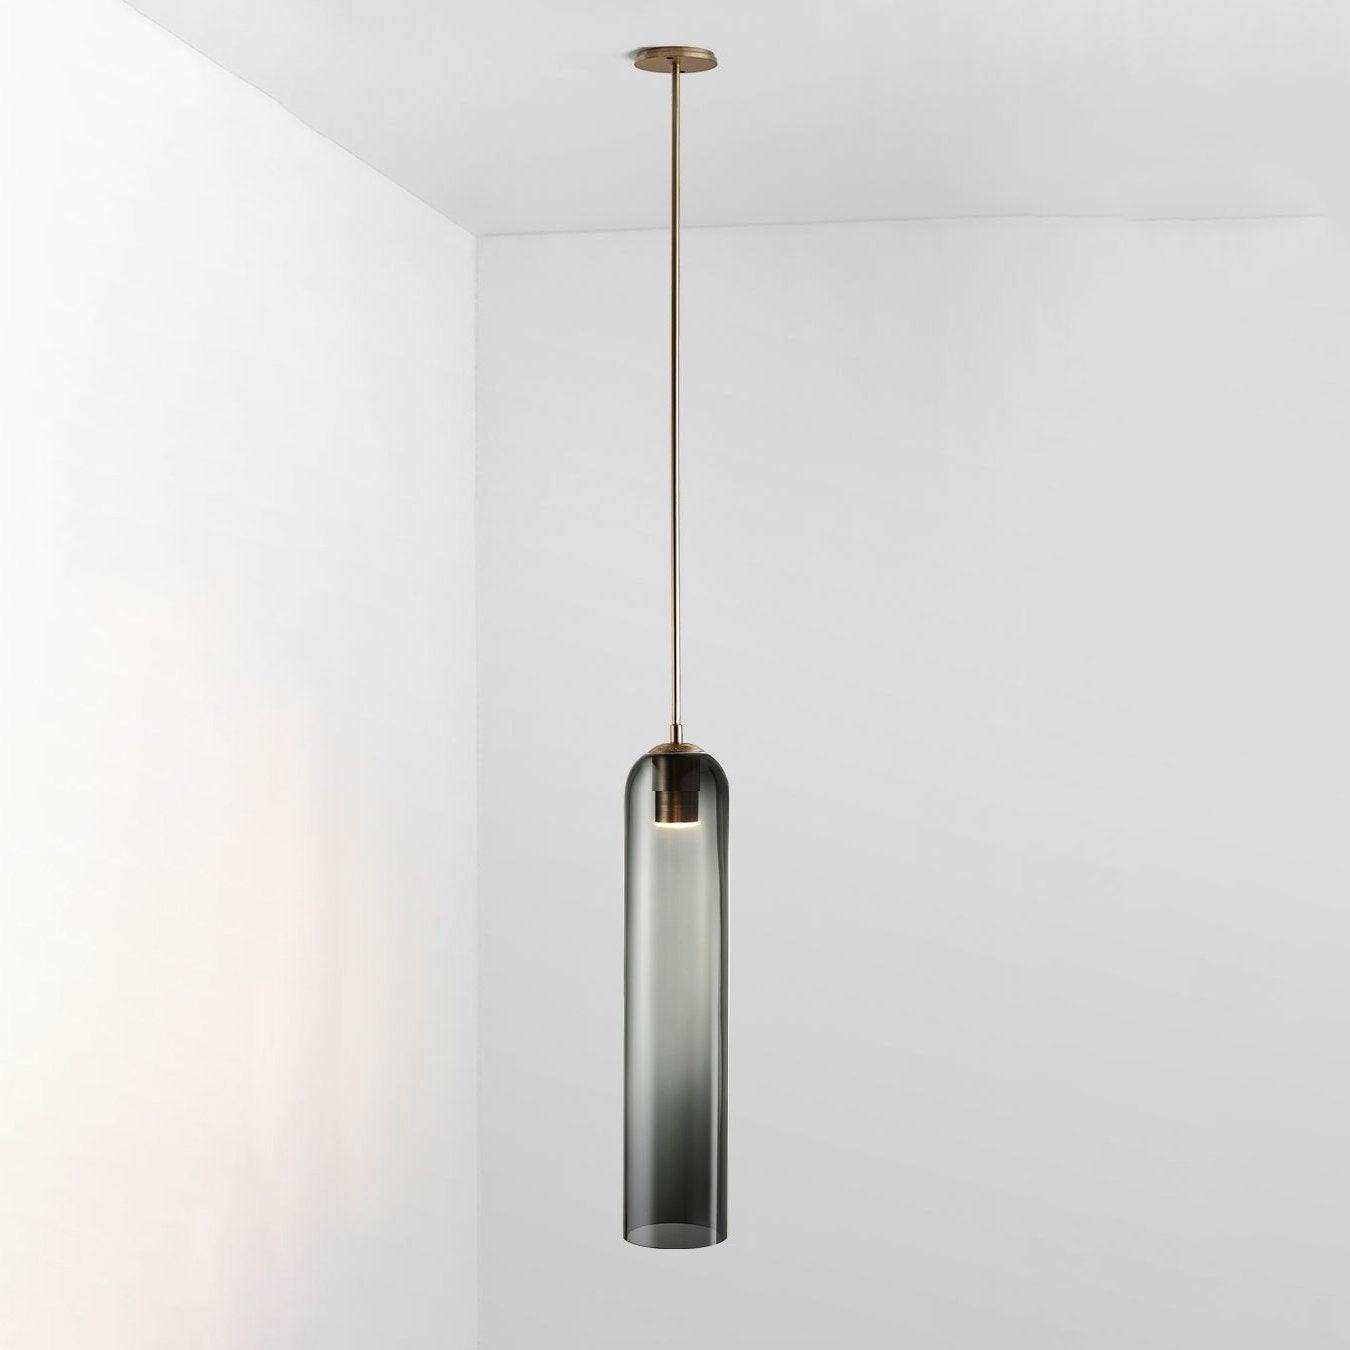 Glass wall sconce/pendant lamp